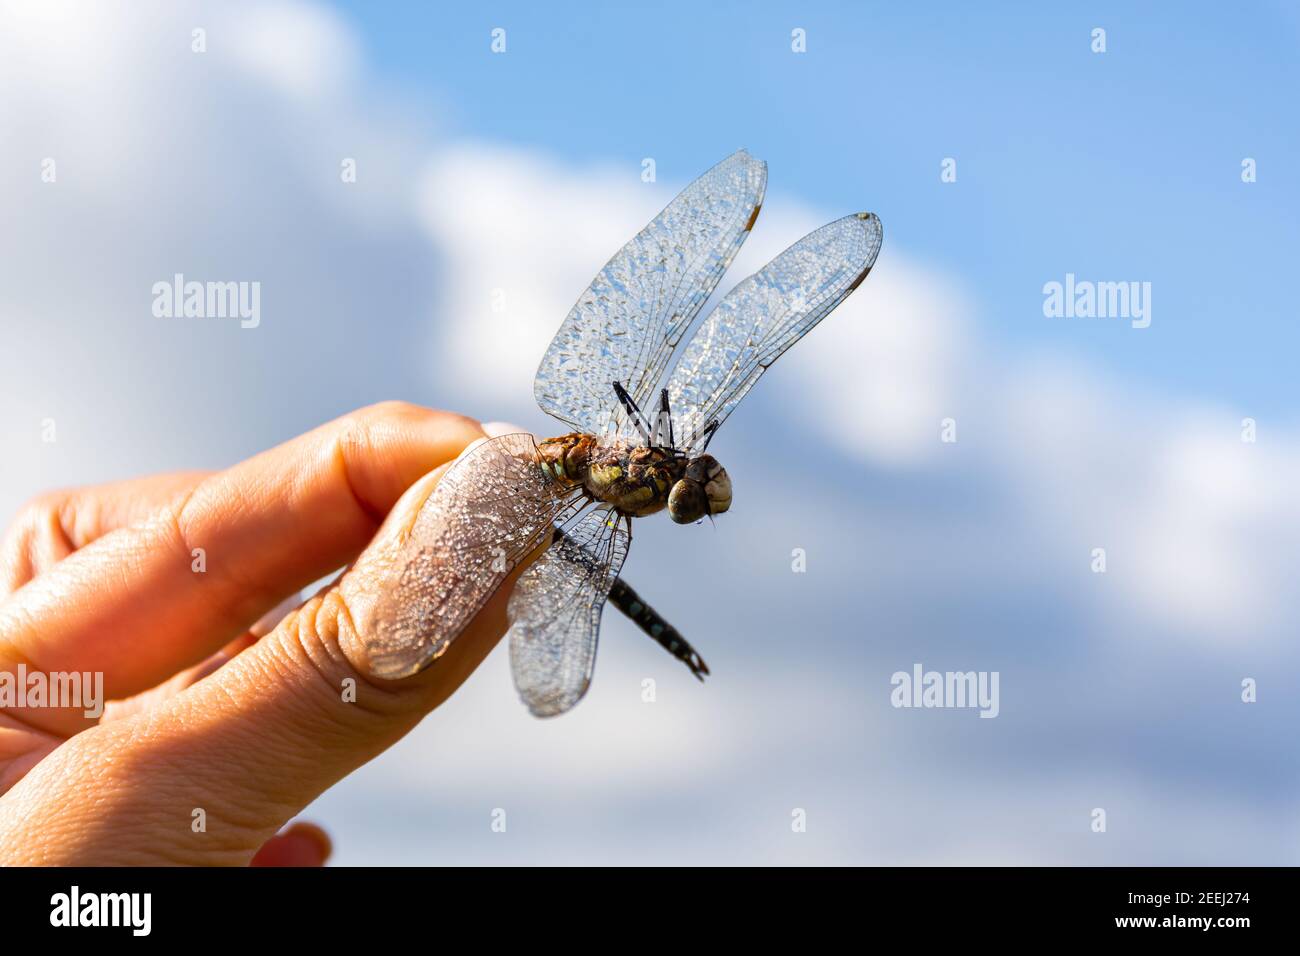 Dragonfly in the hands of a young girl close-up against the blue sky.The wings are covered in dewdrops.A small, fragile insect in the early morning.Th Stock Photo